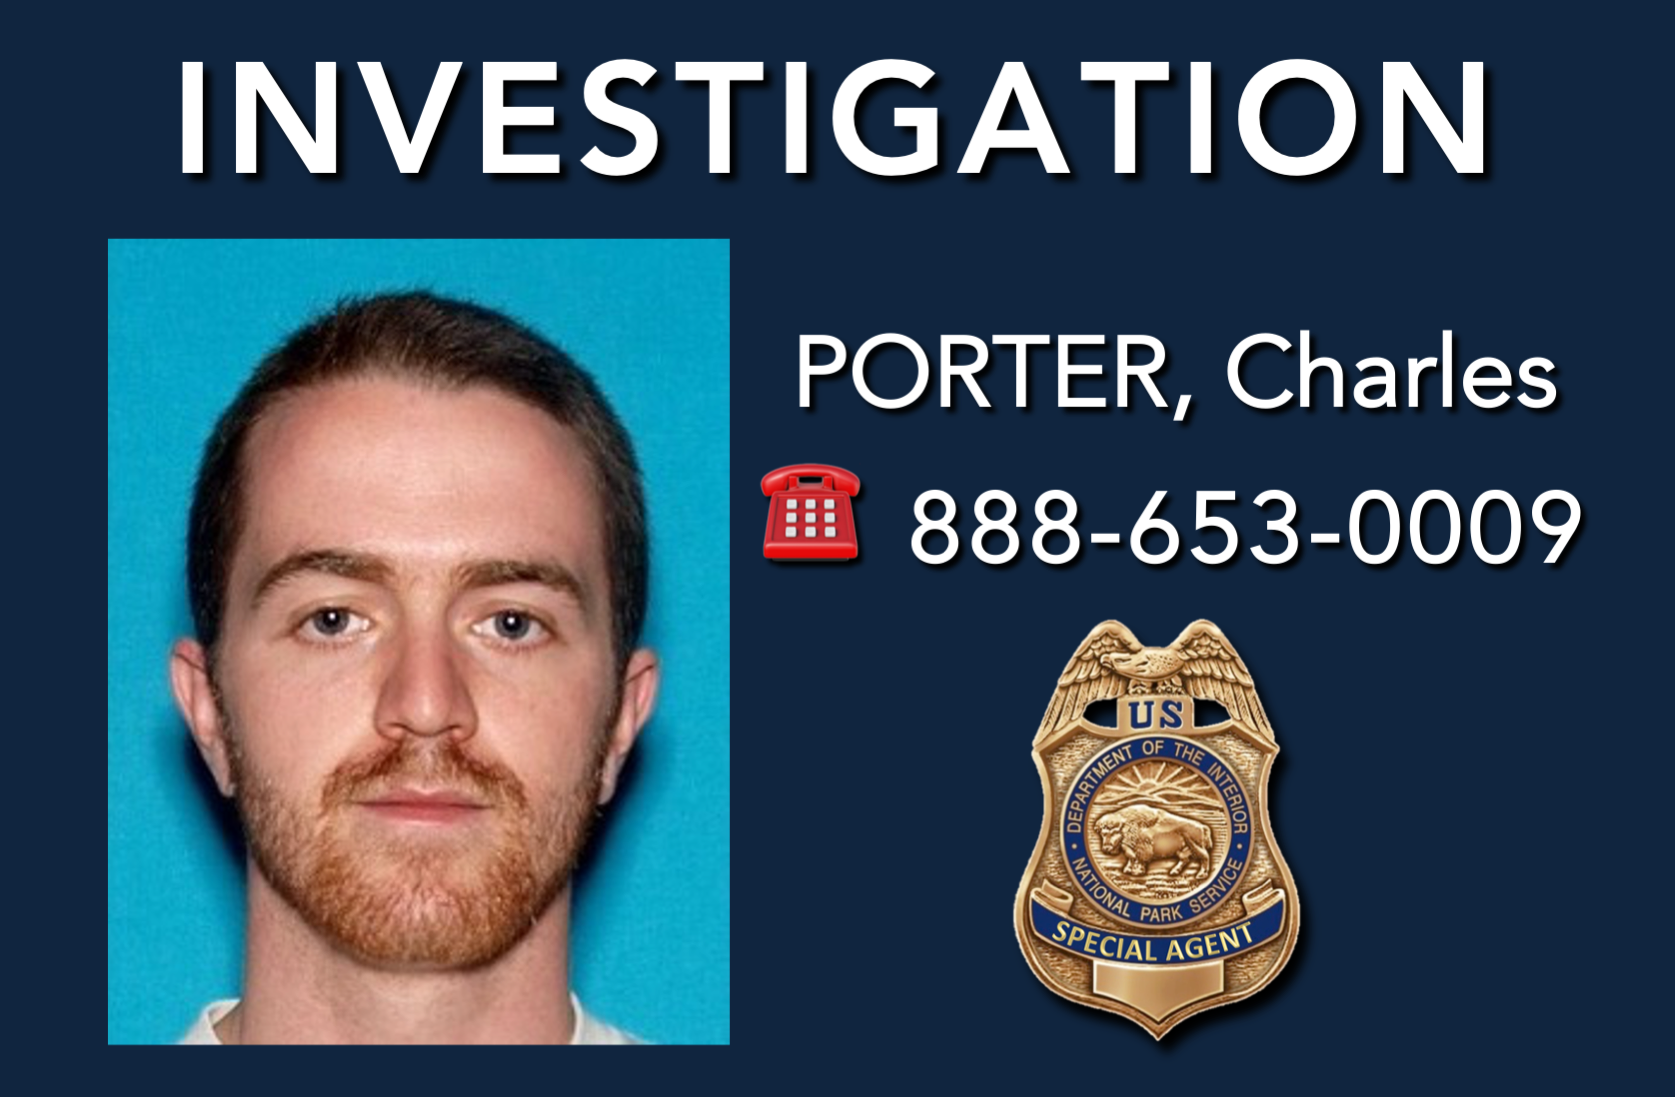 Charles Porter. Photo used with permission from the US Attorney's Office, Eastern District of California.